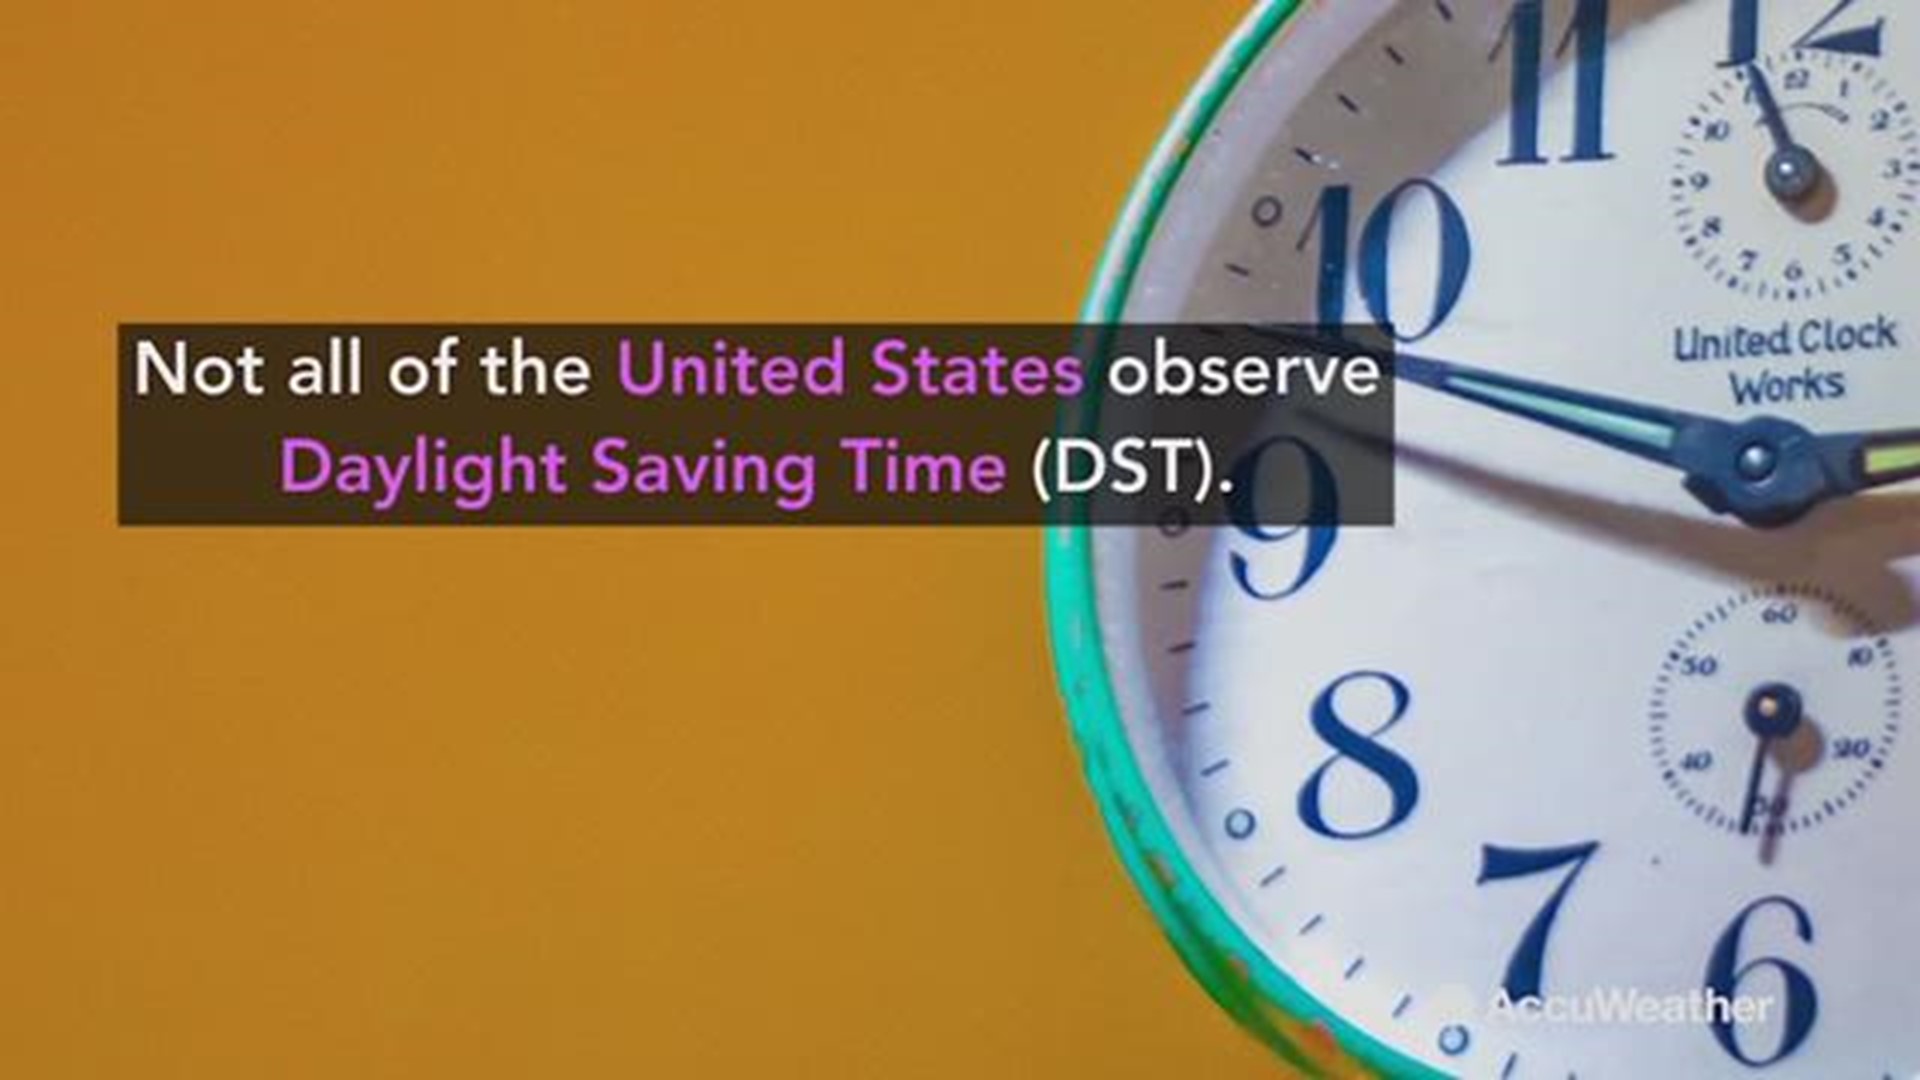 Not all states change the clocks during Daylight Saving Time (DST). Two states, as well as United States territories like Puerto Rico and Guam, stick with the same time all year round.